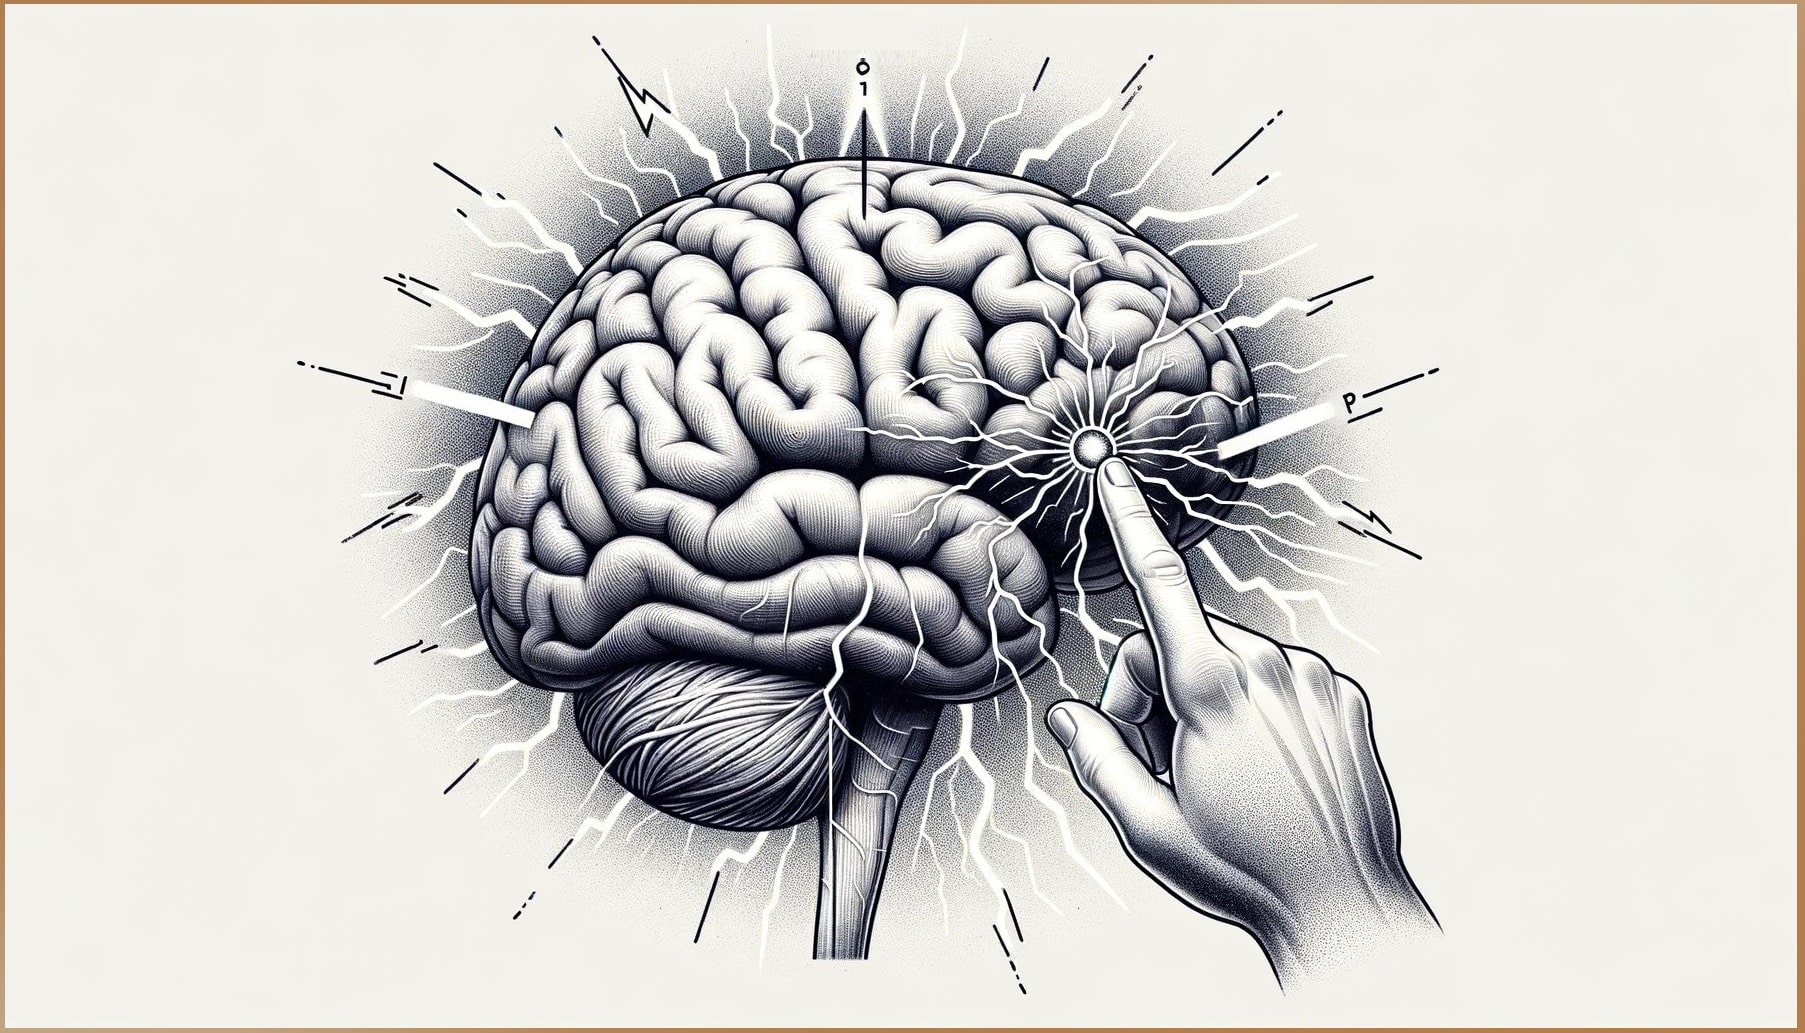 Illustration of a hand pressing a button on the human brain, surrounded by bursts of electricity symbolizing activation.